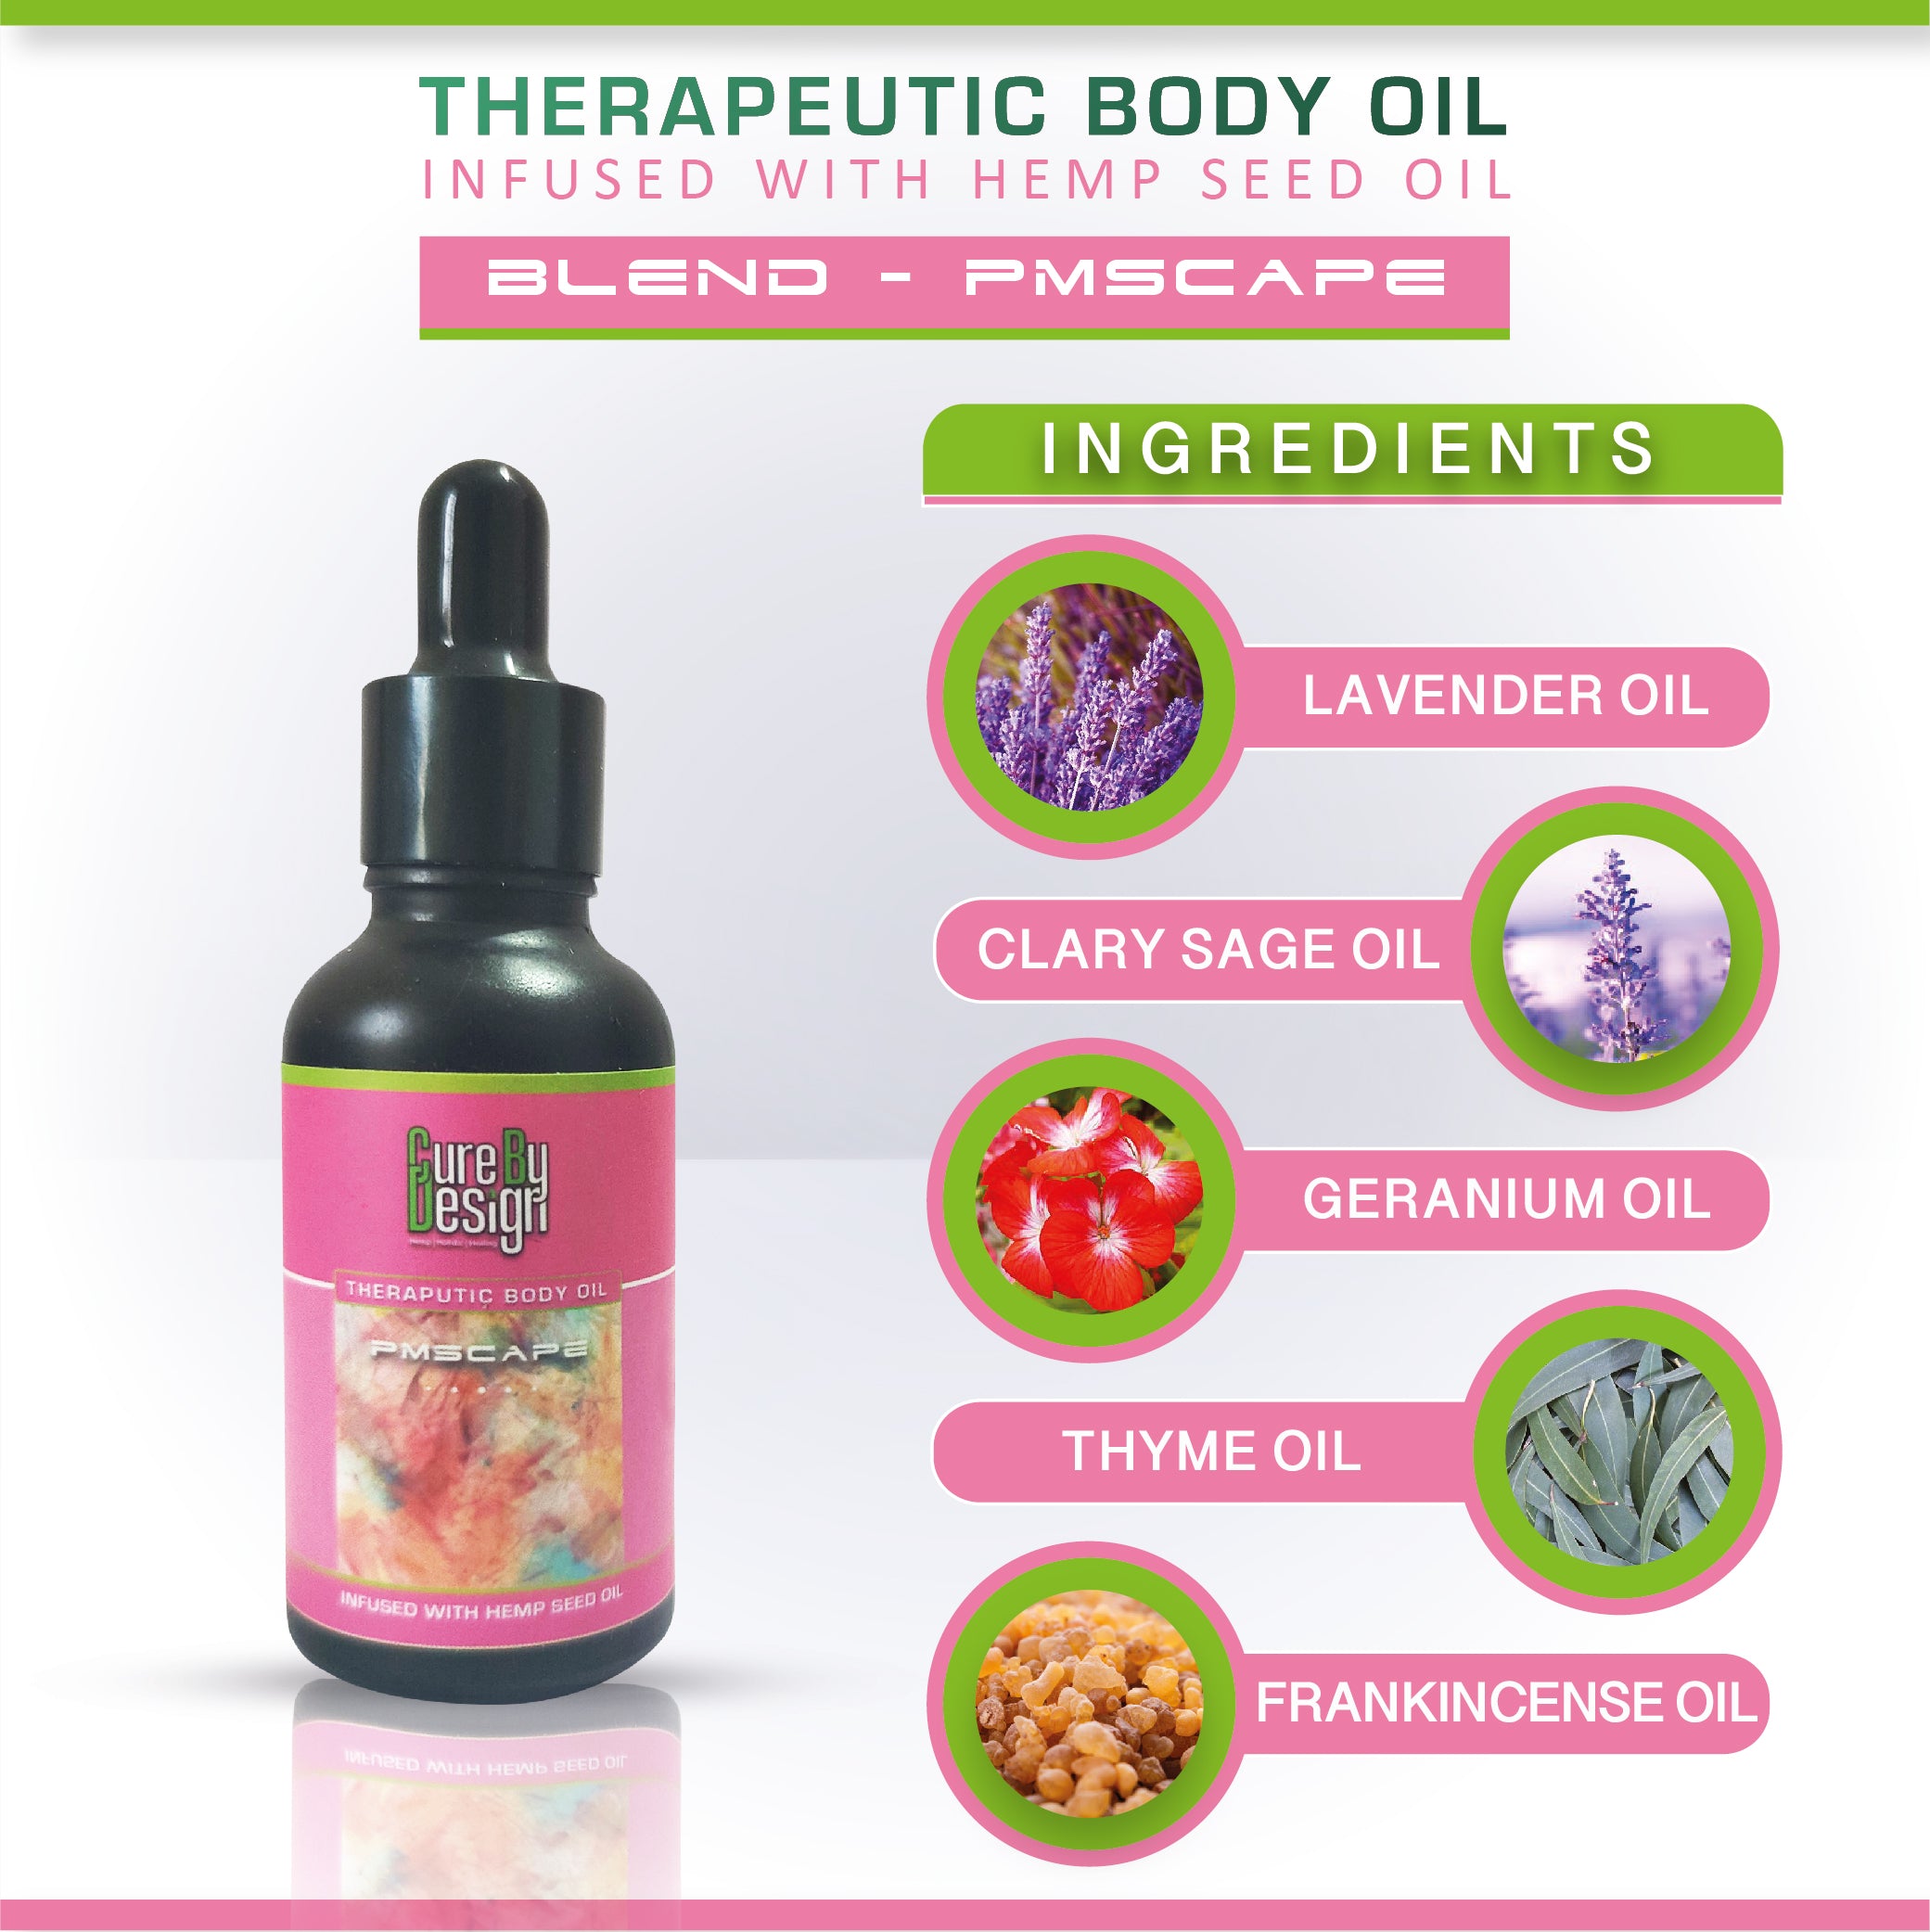 Cure By Design Therapeutic Healing Blend - PMScape